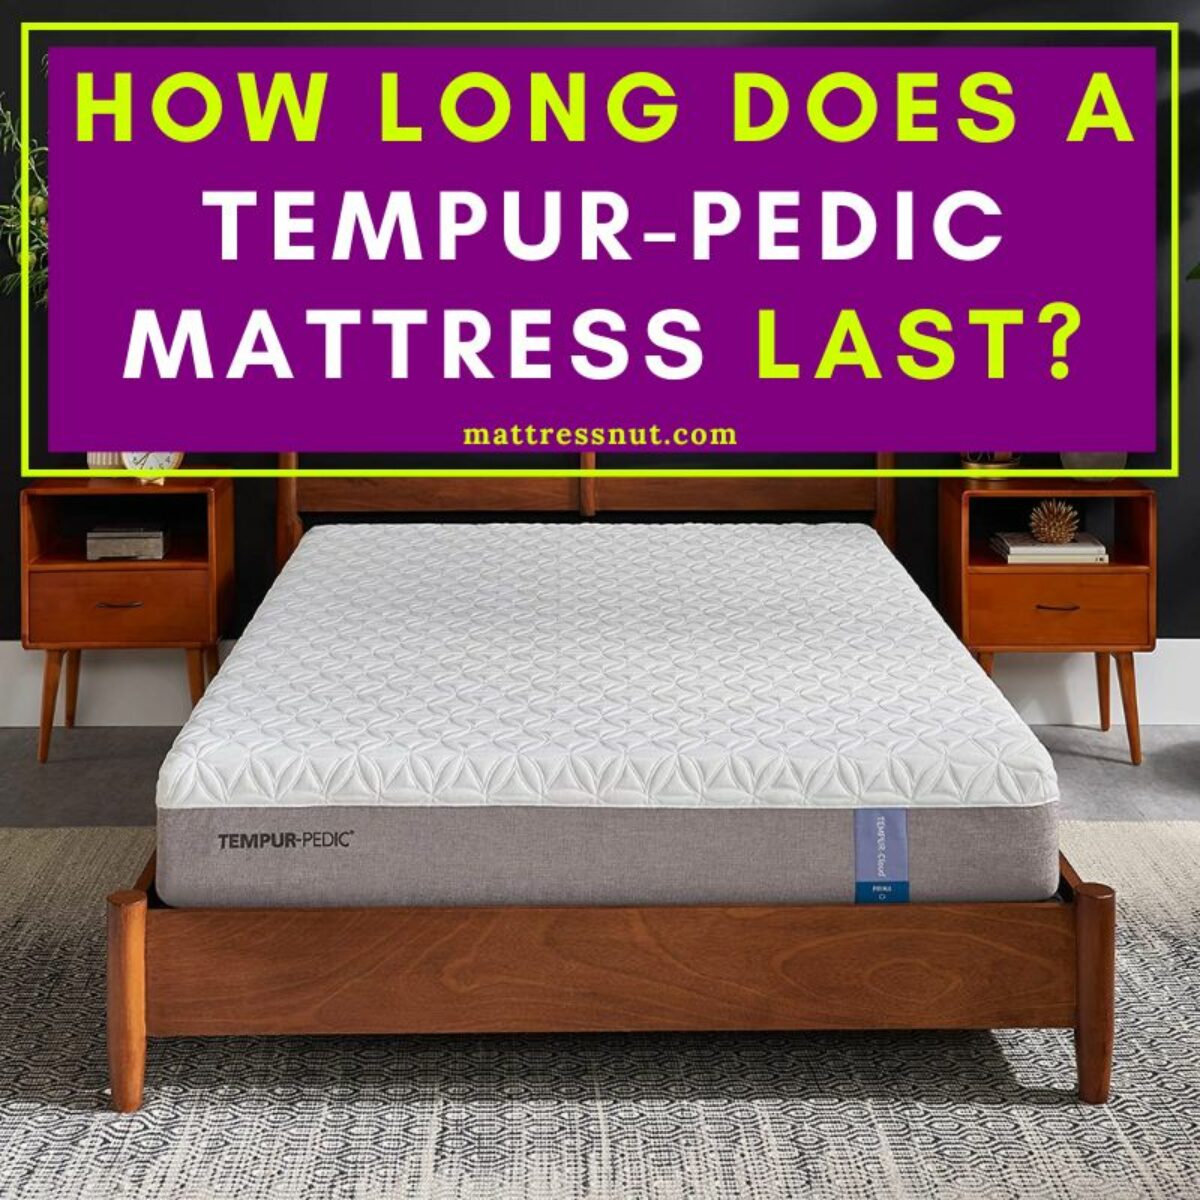 What Is The Average Life Of A Tempurpedic Mattress?